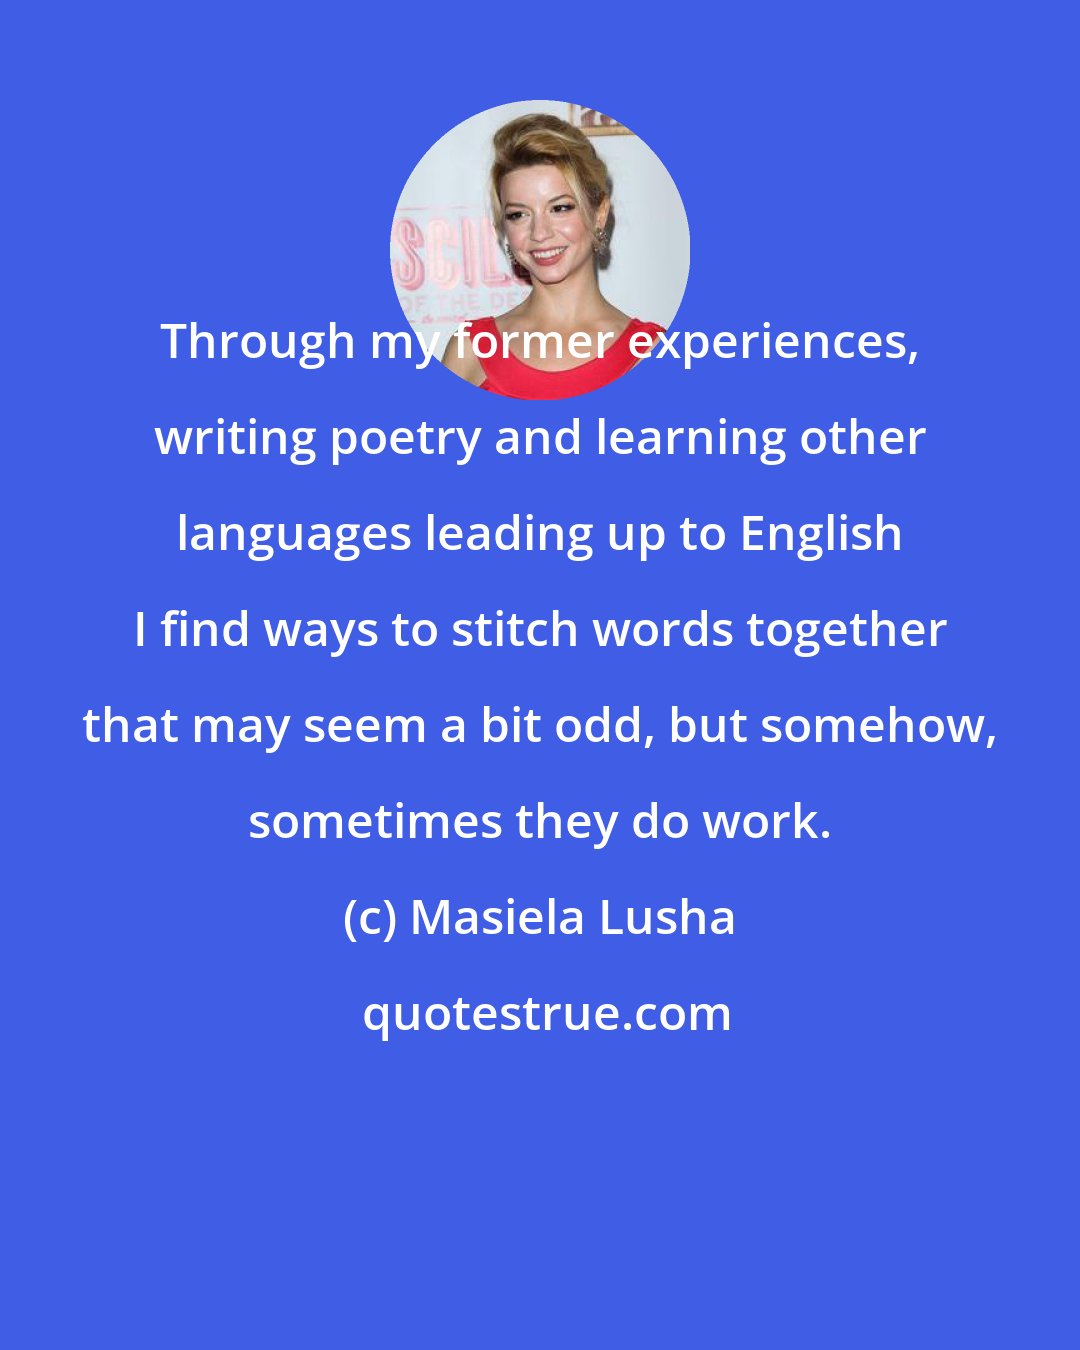 Masiela Lusha: Through my former experiences, writing poetry and learning other languages leading up to English I find ways to stitch words together that may seem a bit odd, but somehow, sometimes they do work.